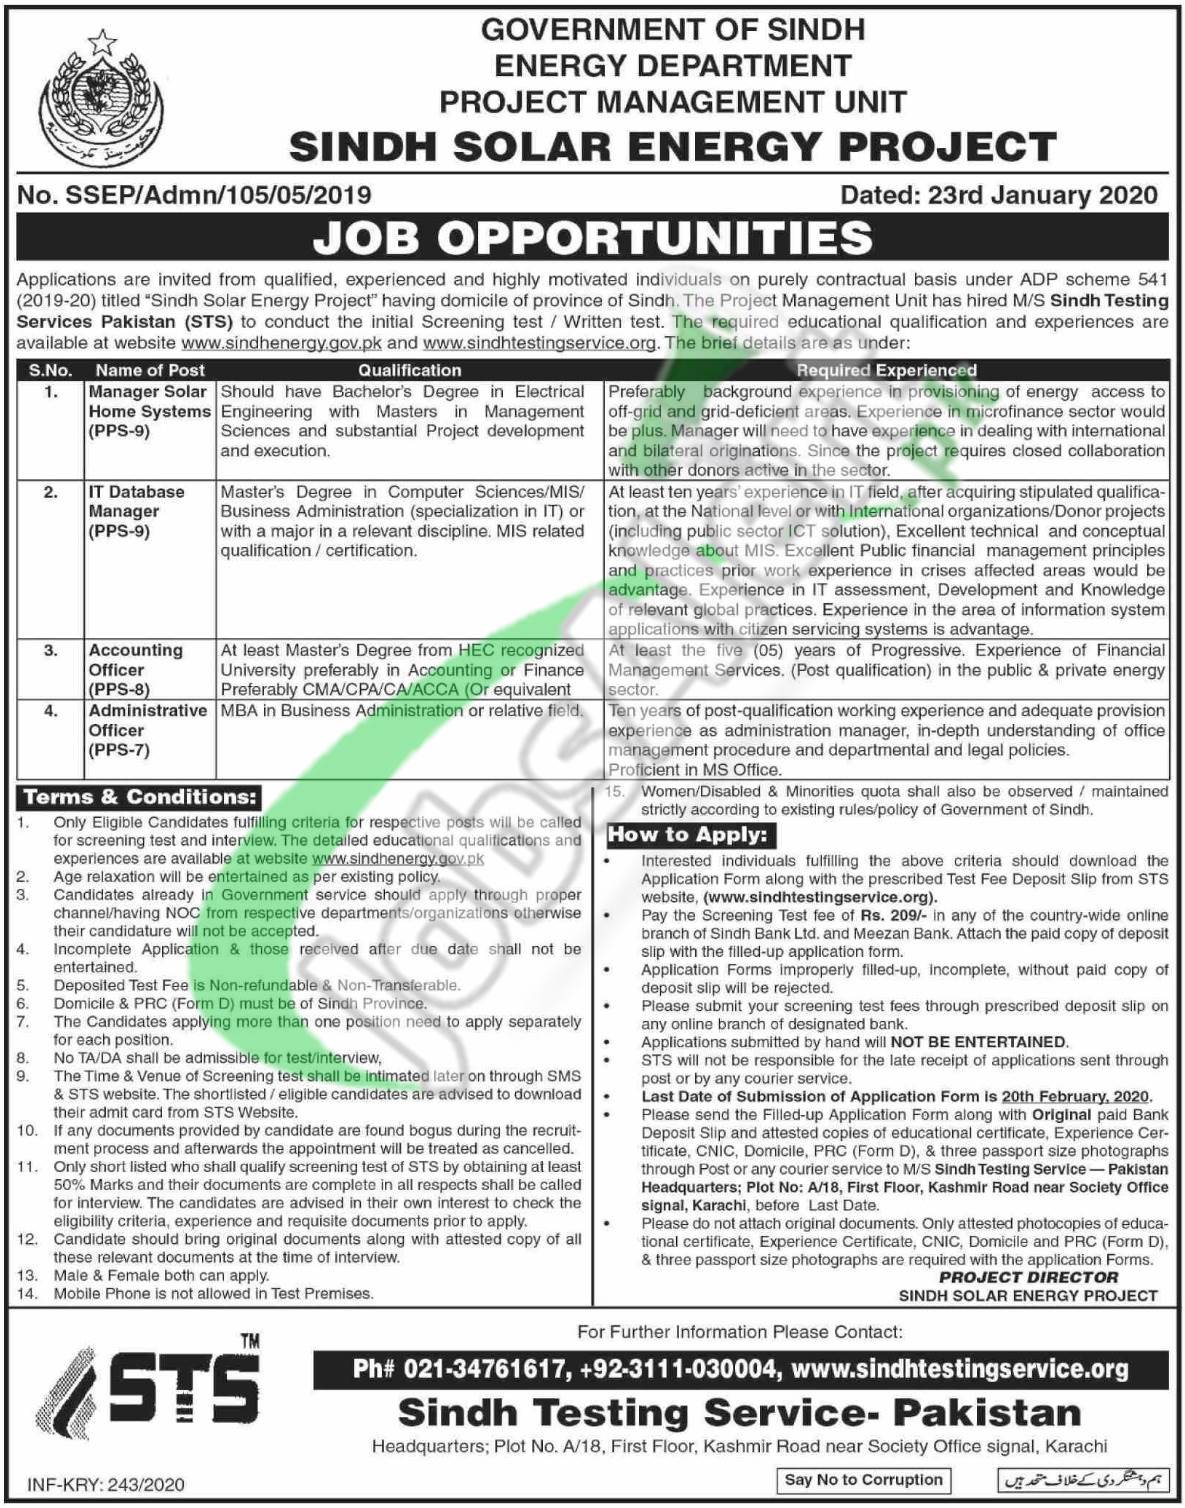 Sindh Solar Energy Project Job Opportunities